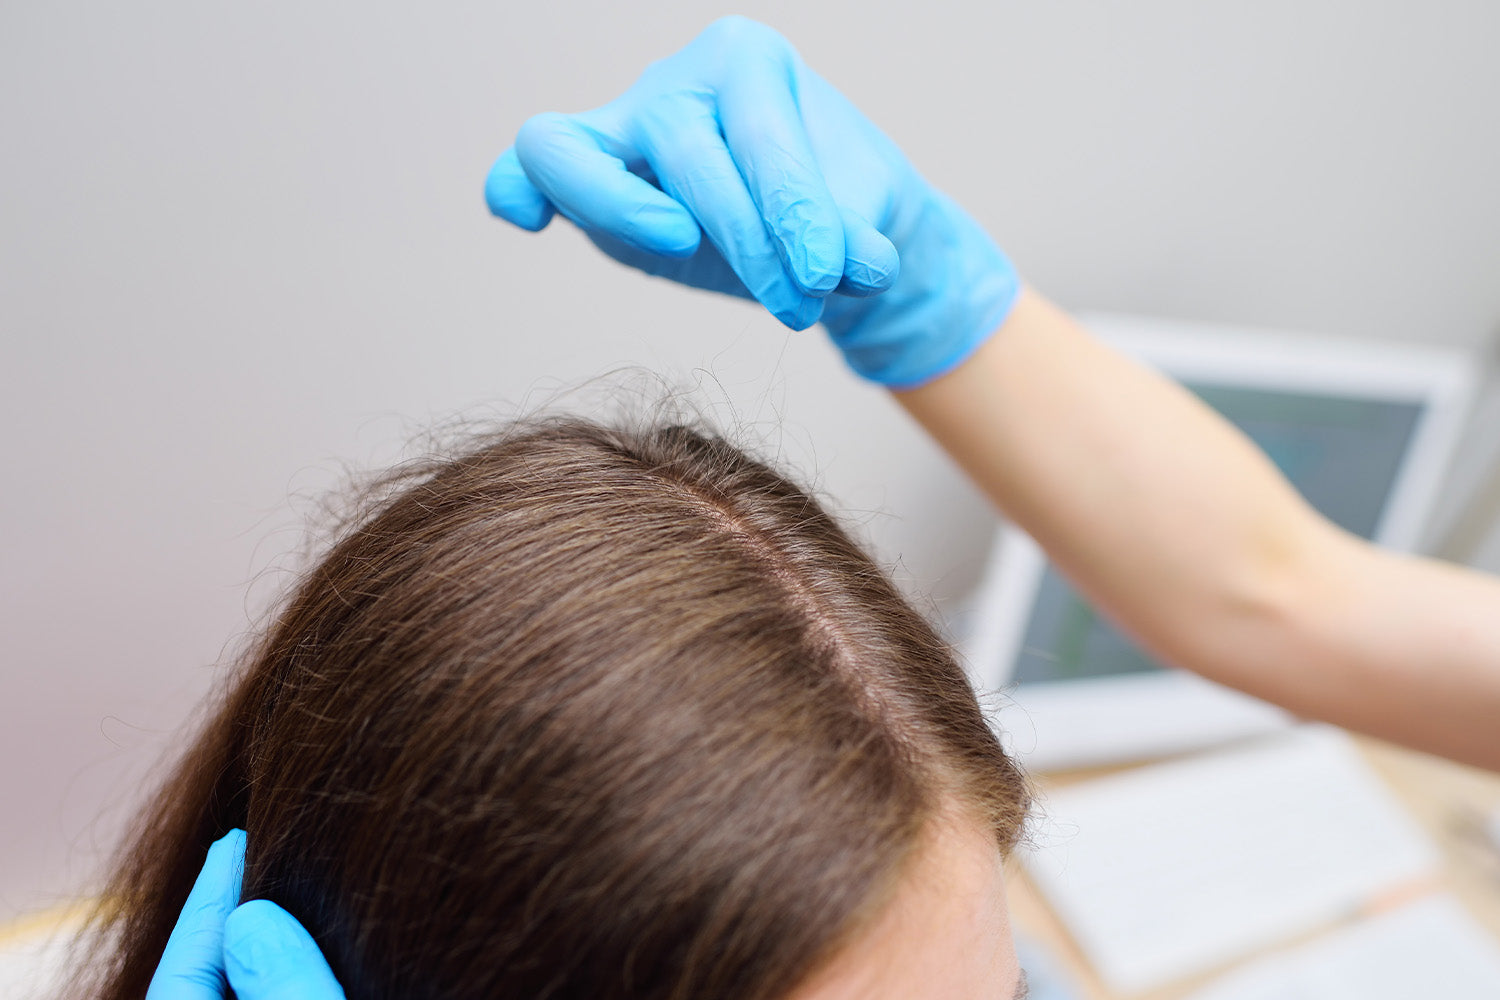 Hair Shedding vs. Hair Loss: What’s the Difference?